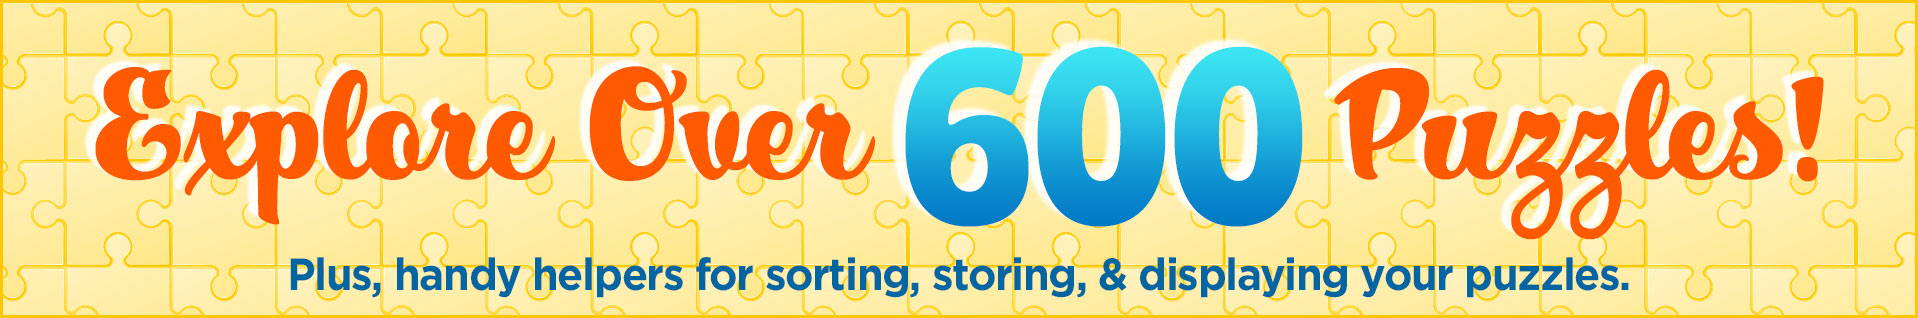 Explore over 600 Puzzles! Plus, handy helpers for sorting, storing, and displaying your puzzles.